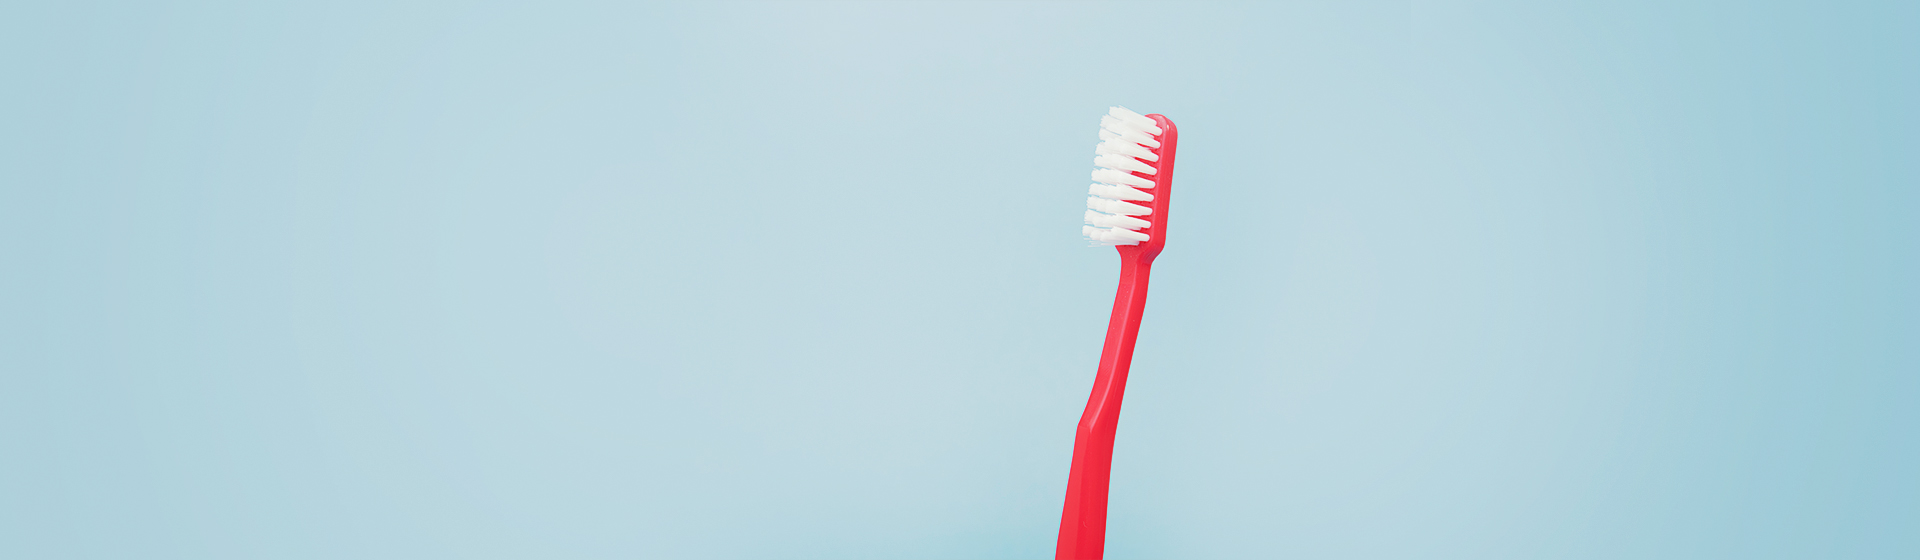 How to Take Care of Your Toothbrush